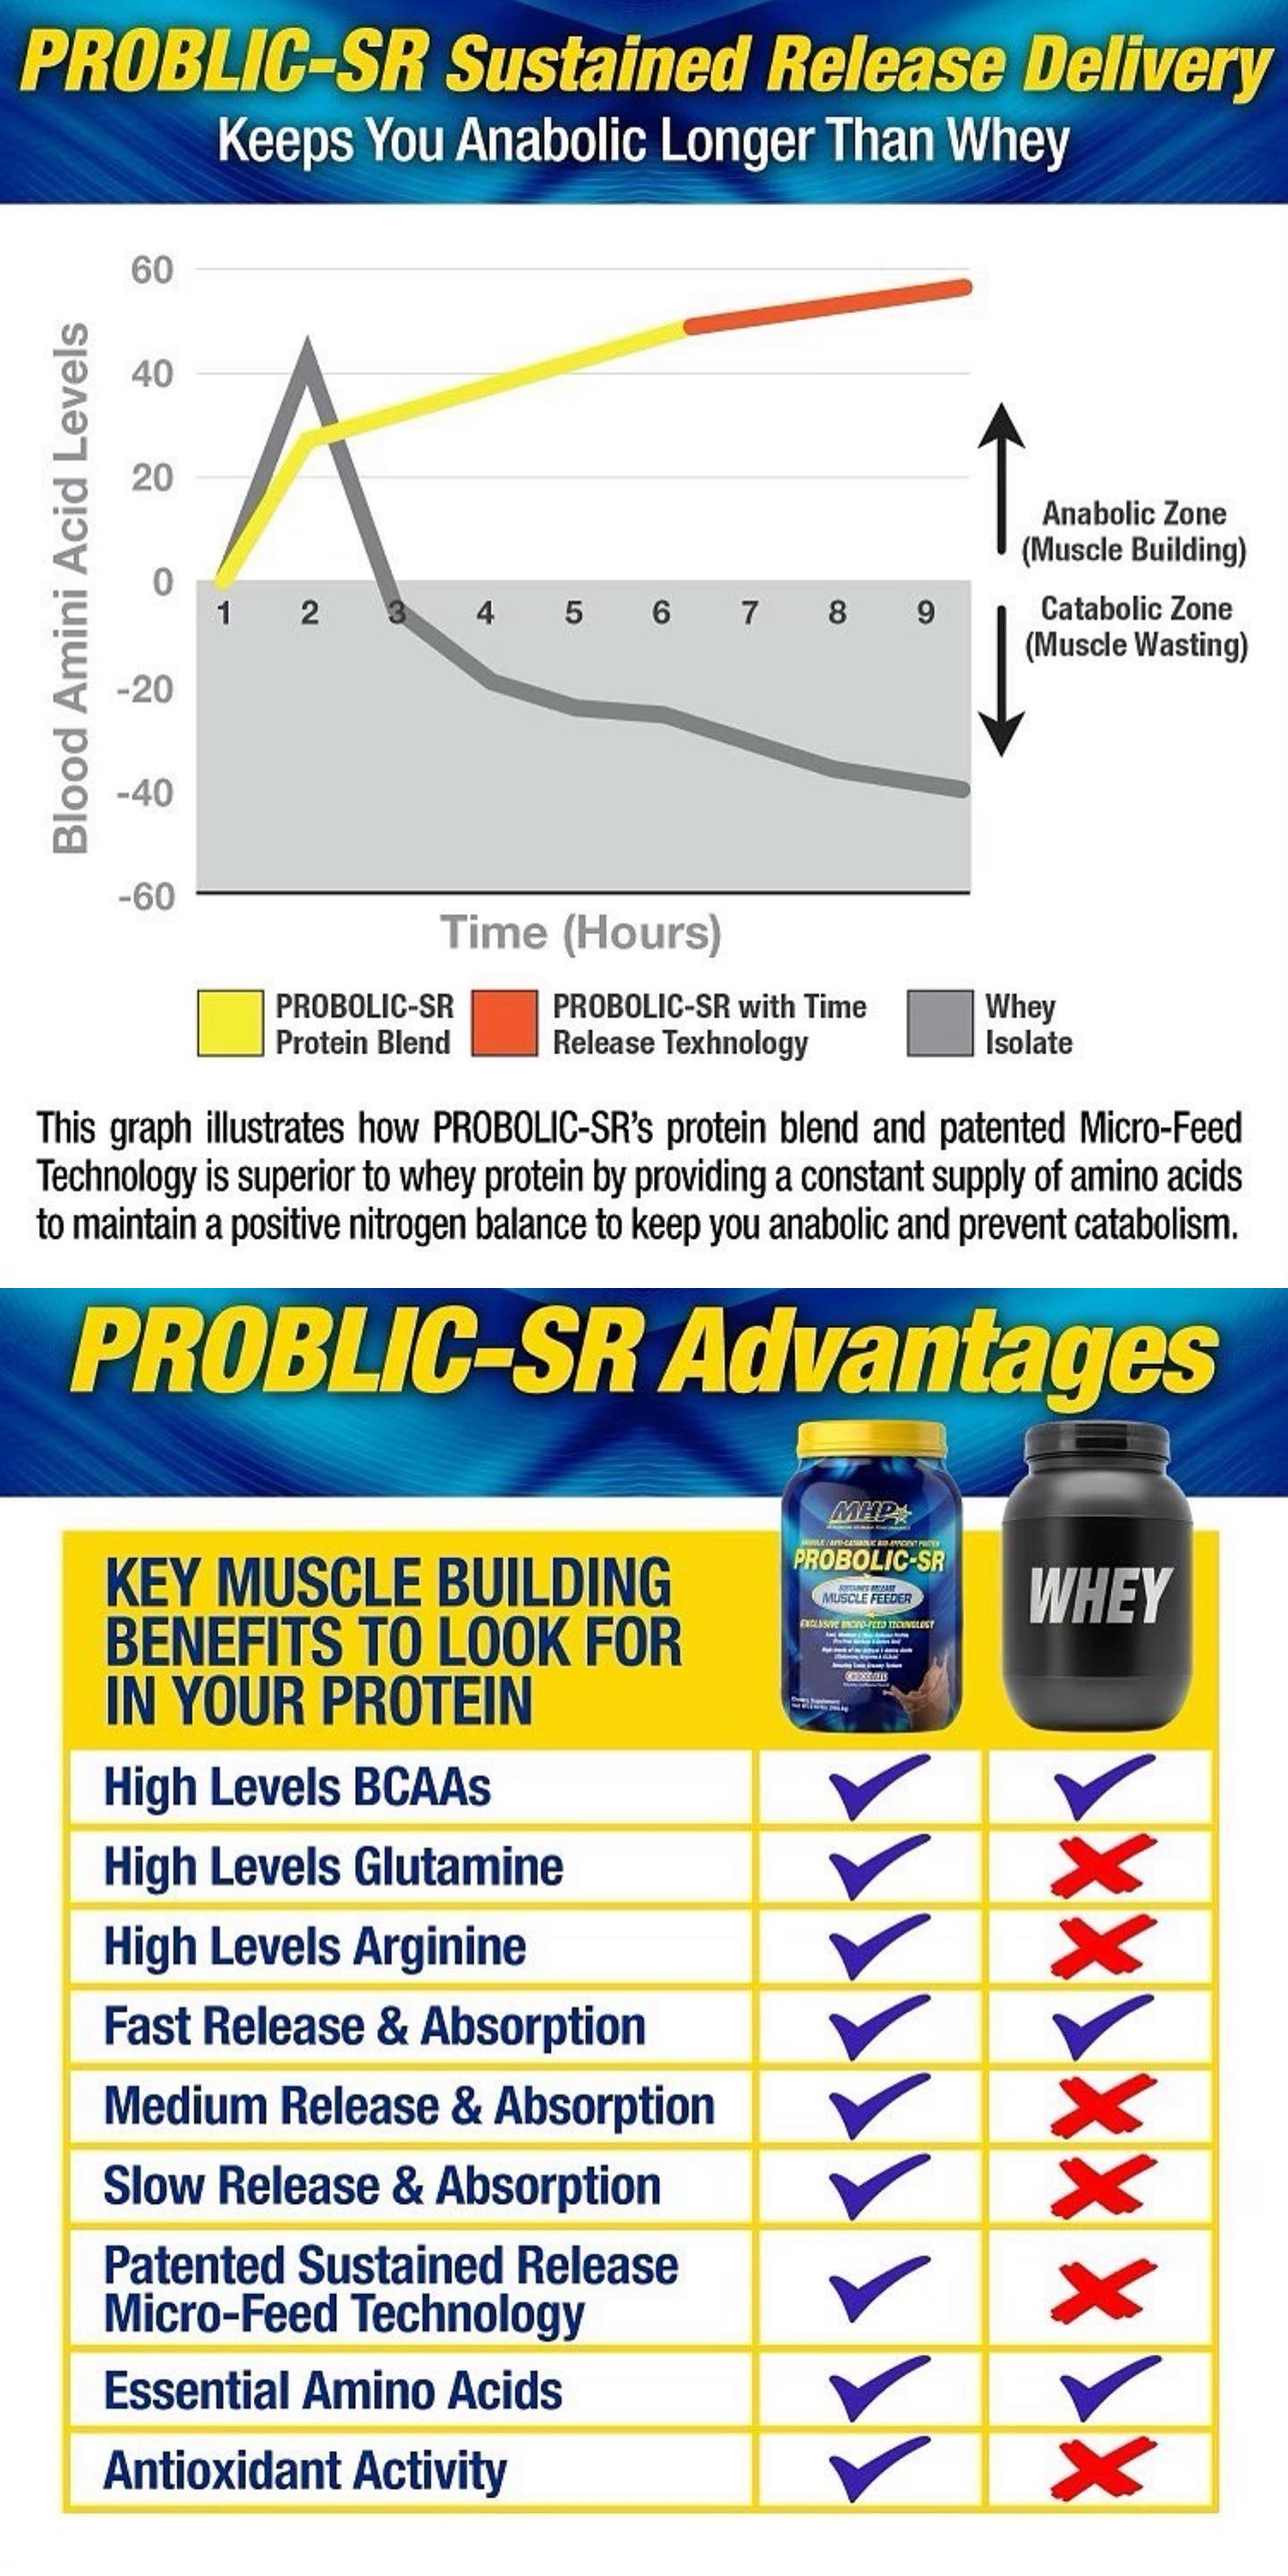 Graph comparing PROBOLIC-SR's sustained release to whey, highlighting superior constant amino acid supply using Micro-Feed Technology for muscle building.